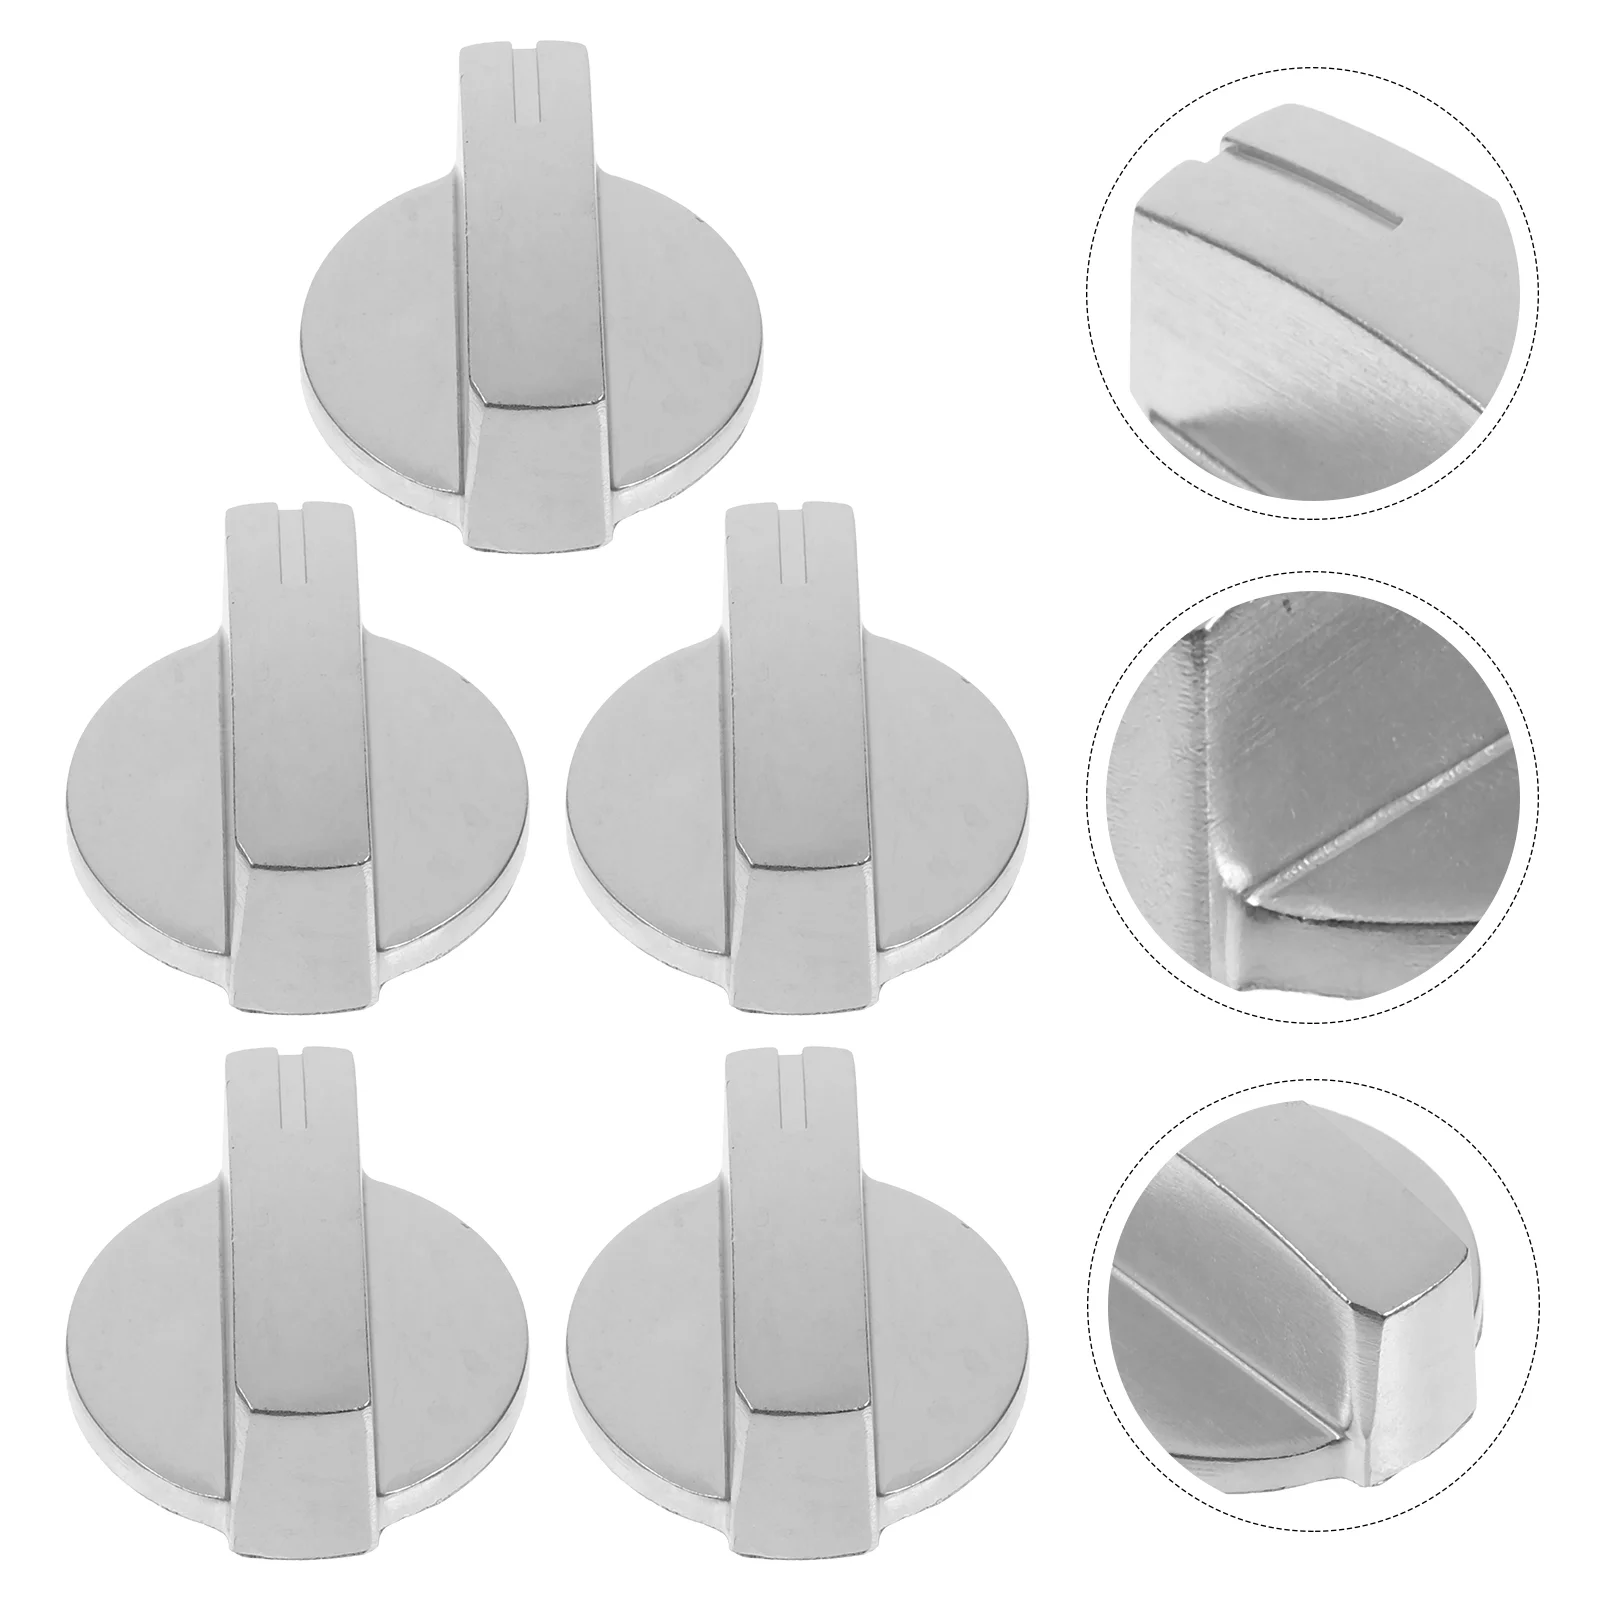 

5pcs Gas Stove Switch Knobs Rotary Switches Control Knob Gas Stove On-off Knobs